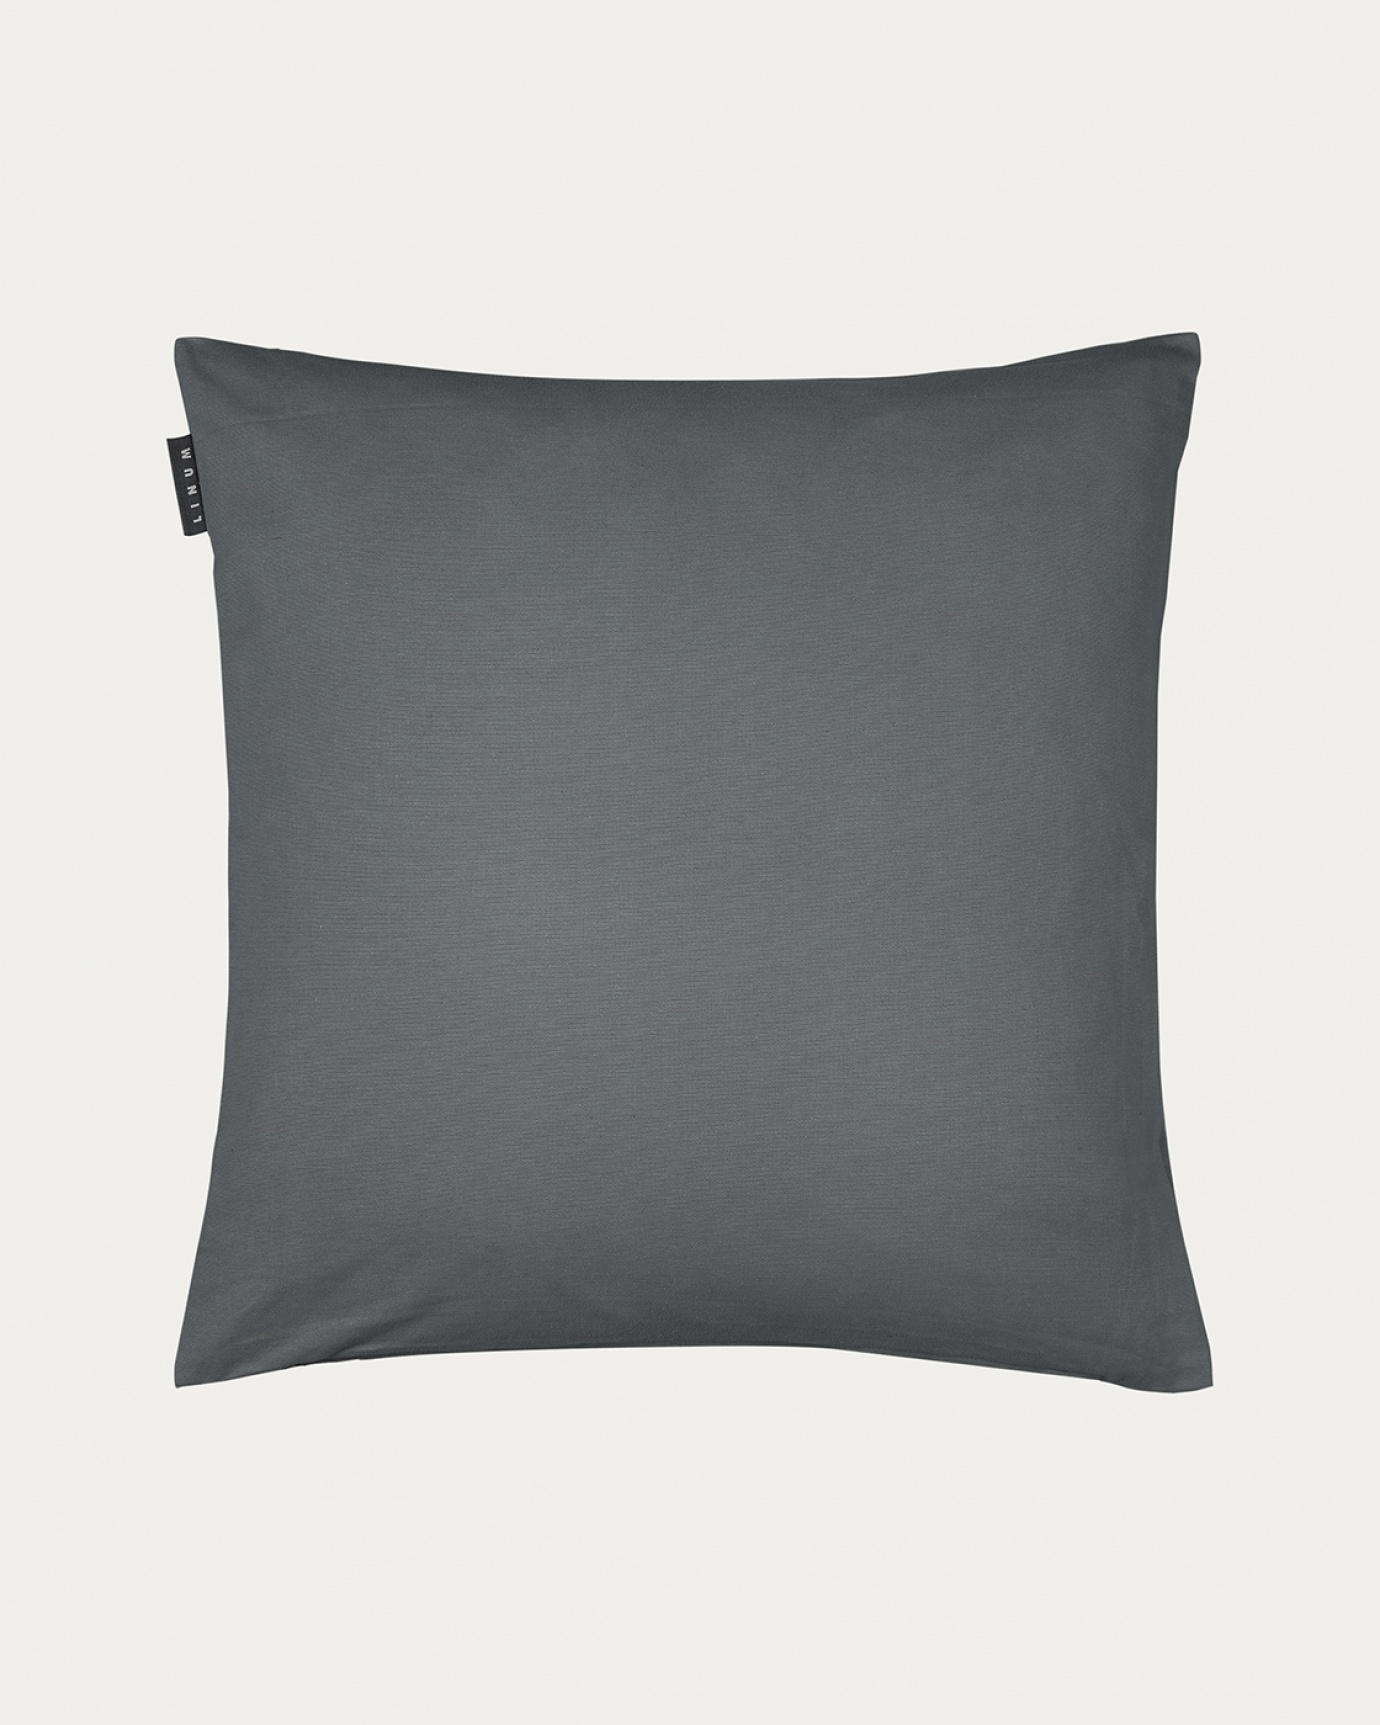 Product image granite grey ANNABELL cushion cover made of soft cotton from LINUM DESIGN. Size 50x50 cm.